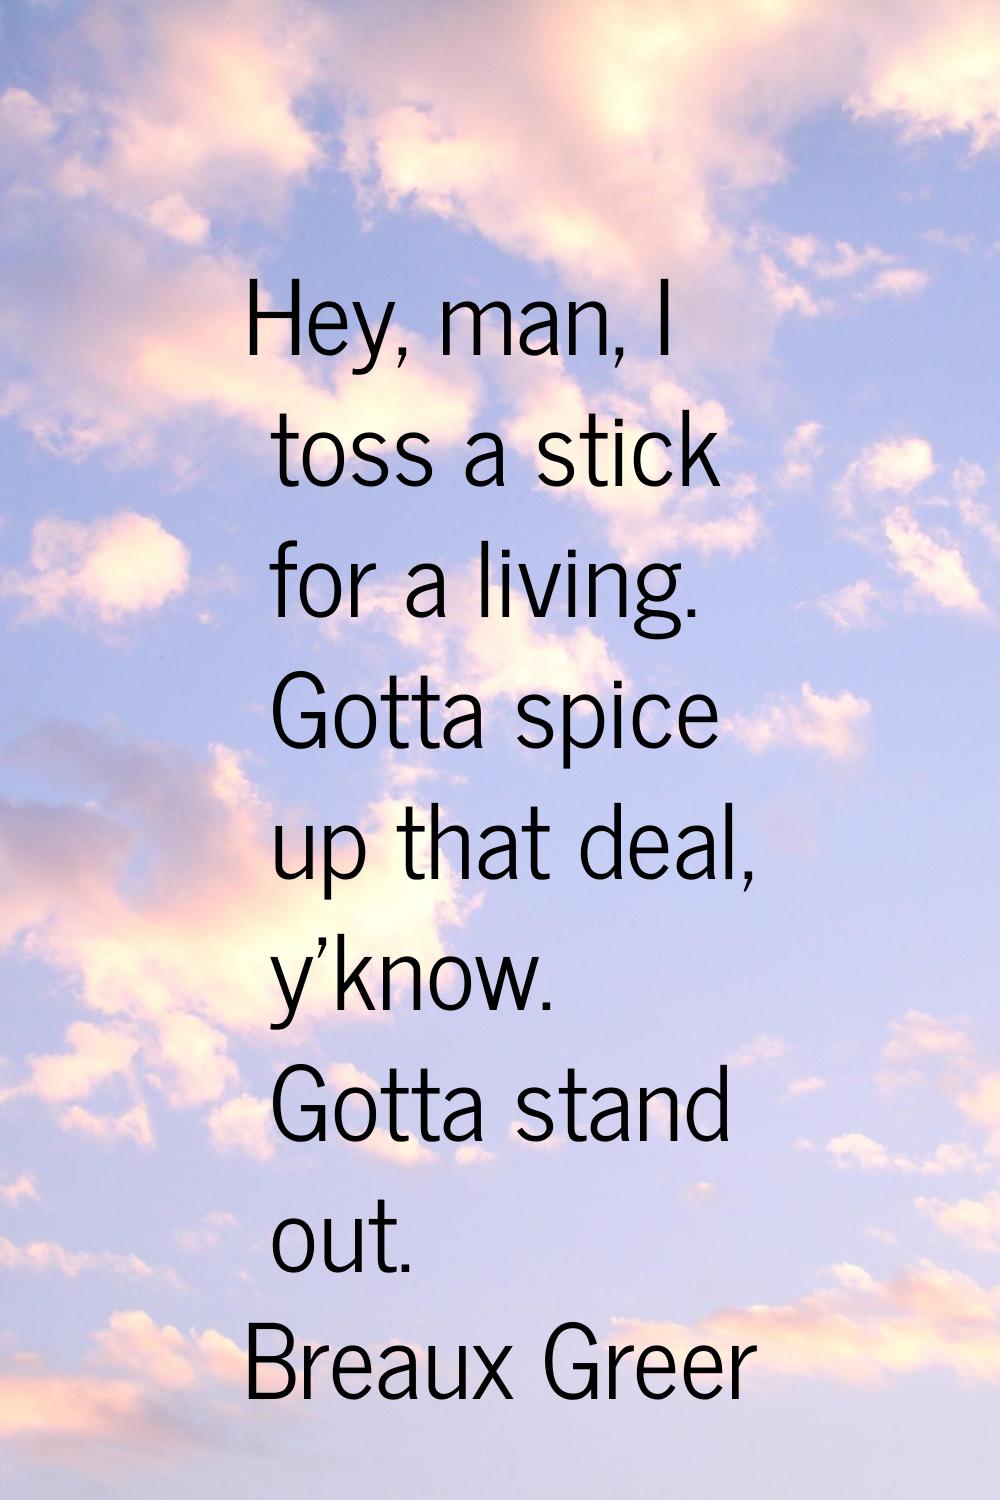 Hey, man, I toss a stick for a living. Gotta spice up that deal, y'know. Gotta stand out.